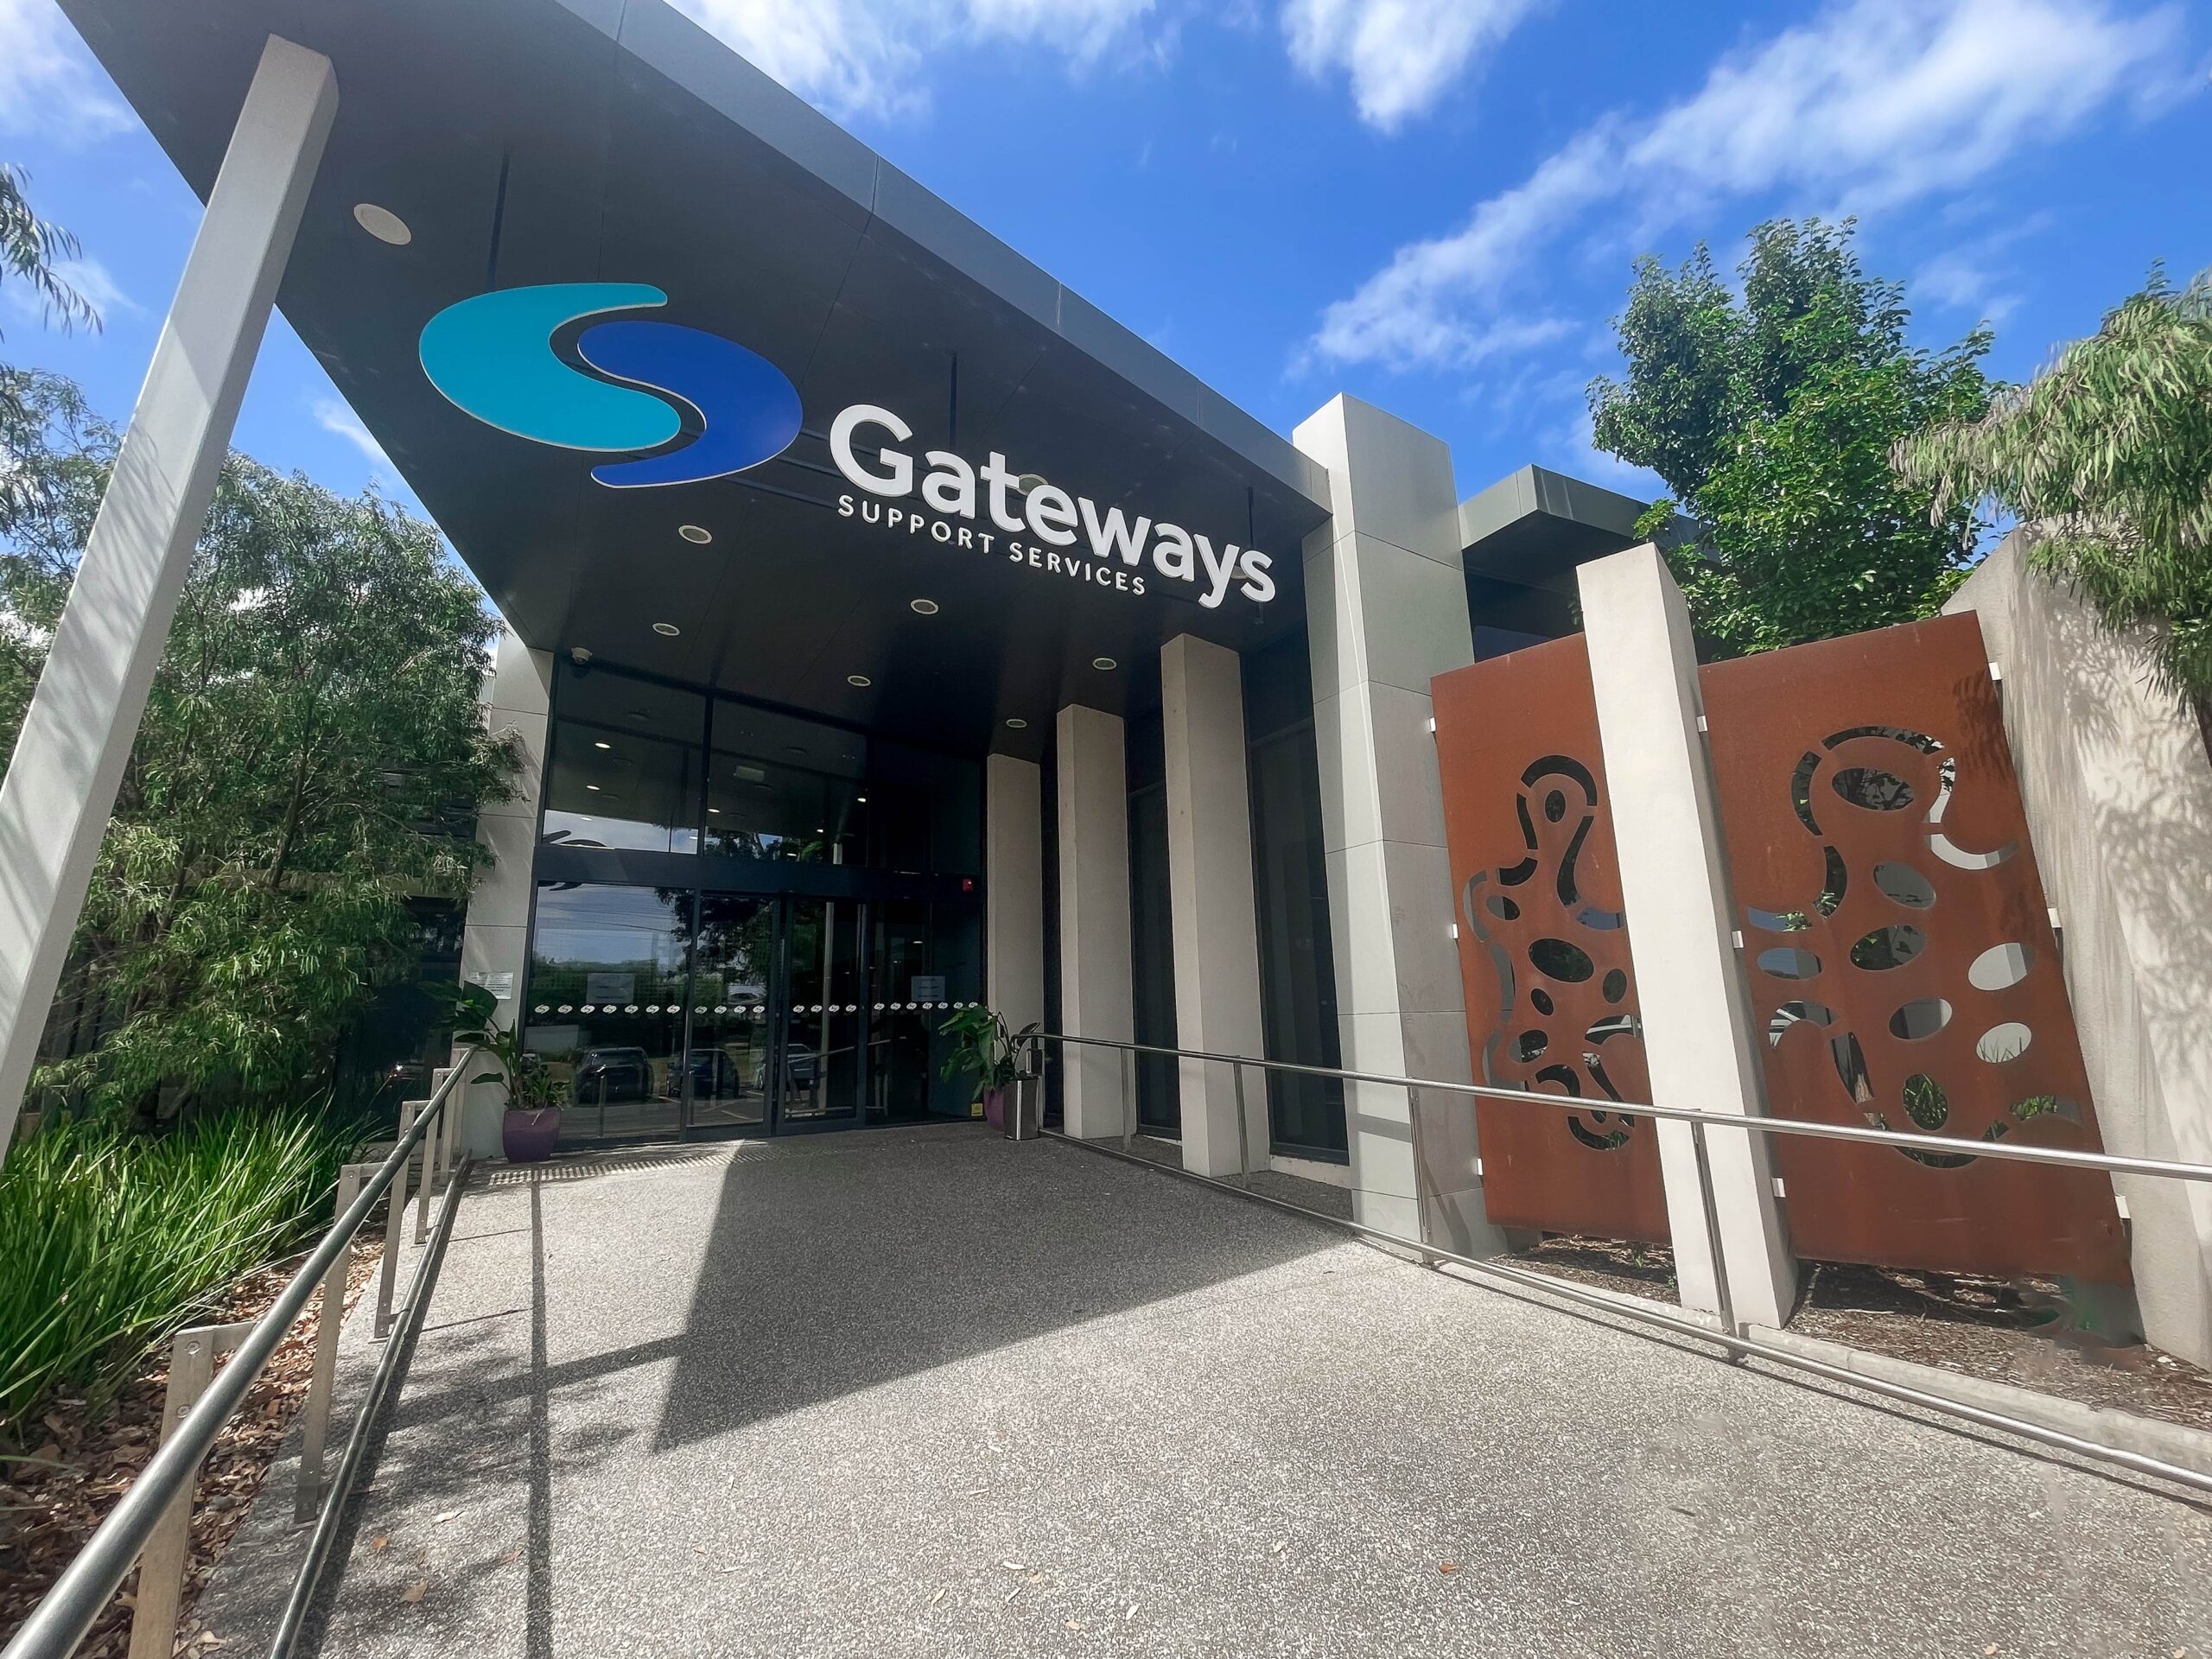 Front of Gateways building in North Geelong